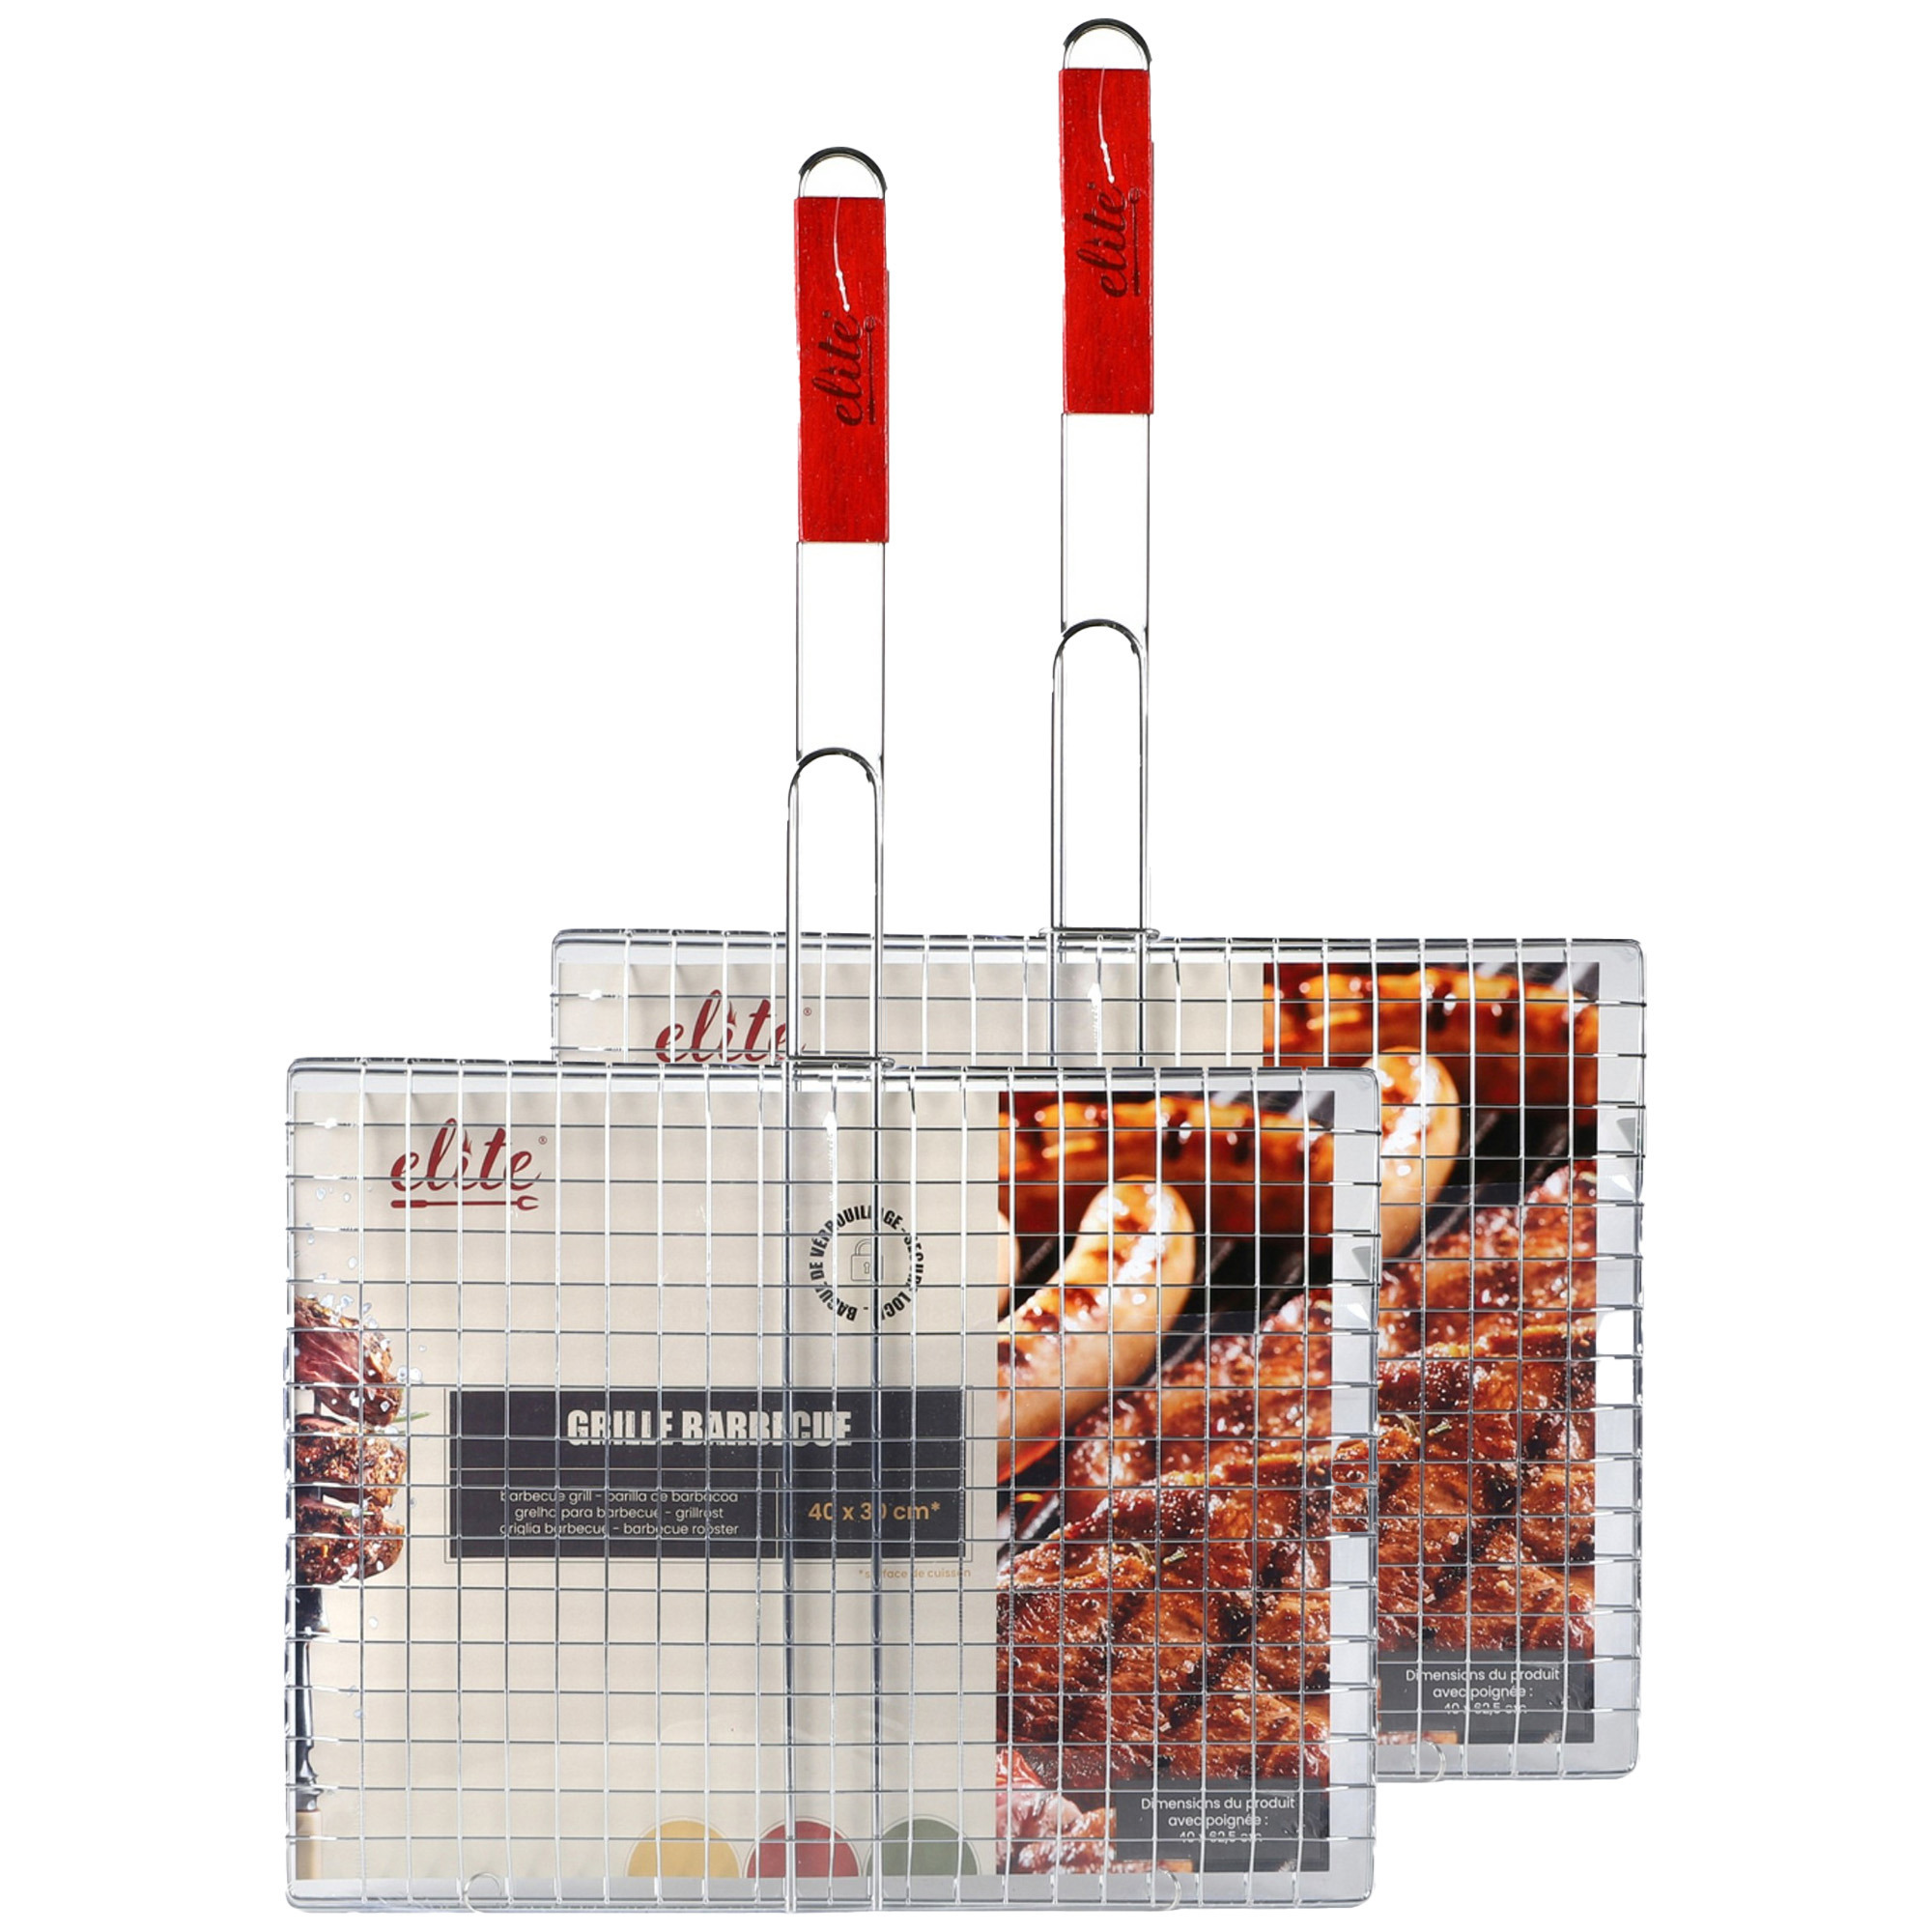 Elite BBQ/barbecue rooster - 2x - klem grill - metaal/hout - x 62 x 1 cm - Extra groot formaat -